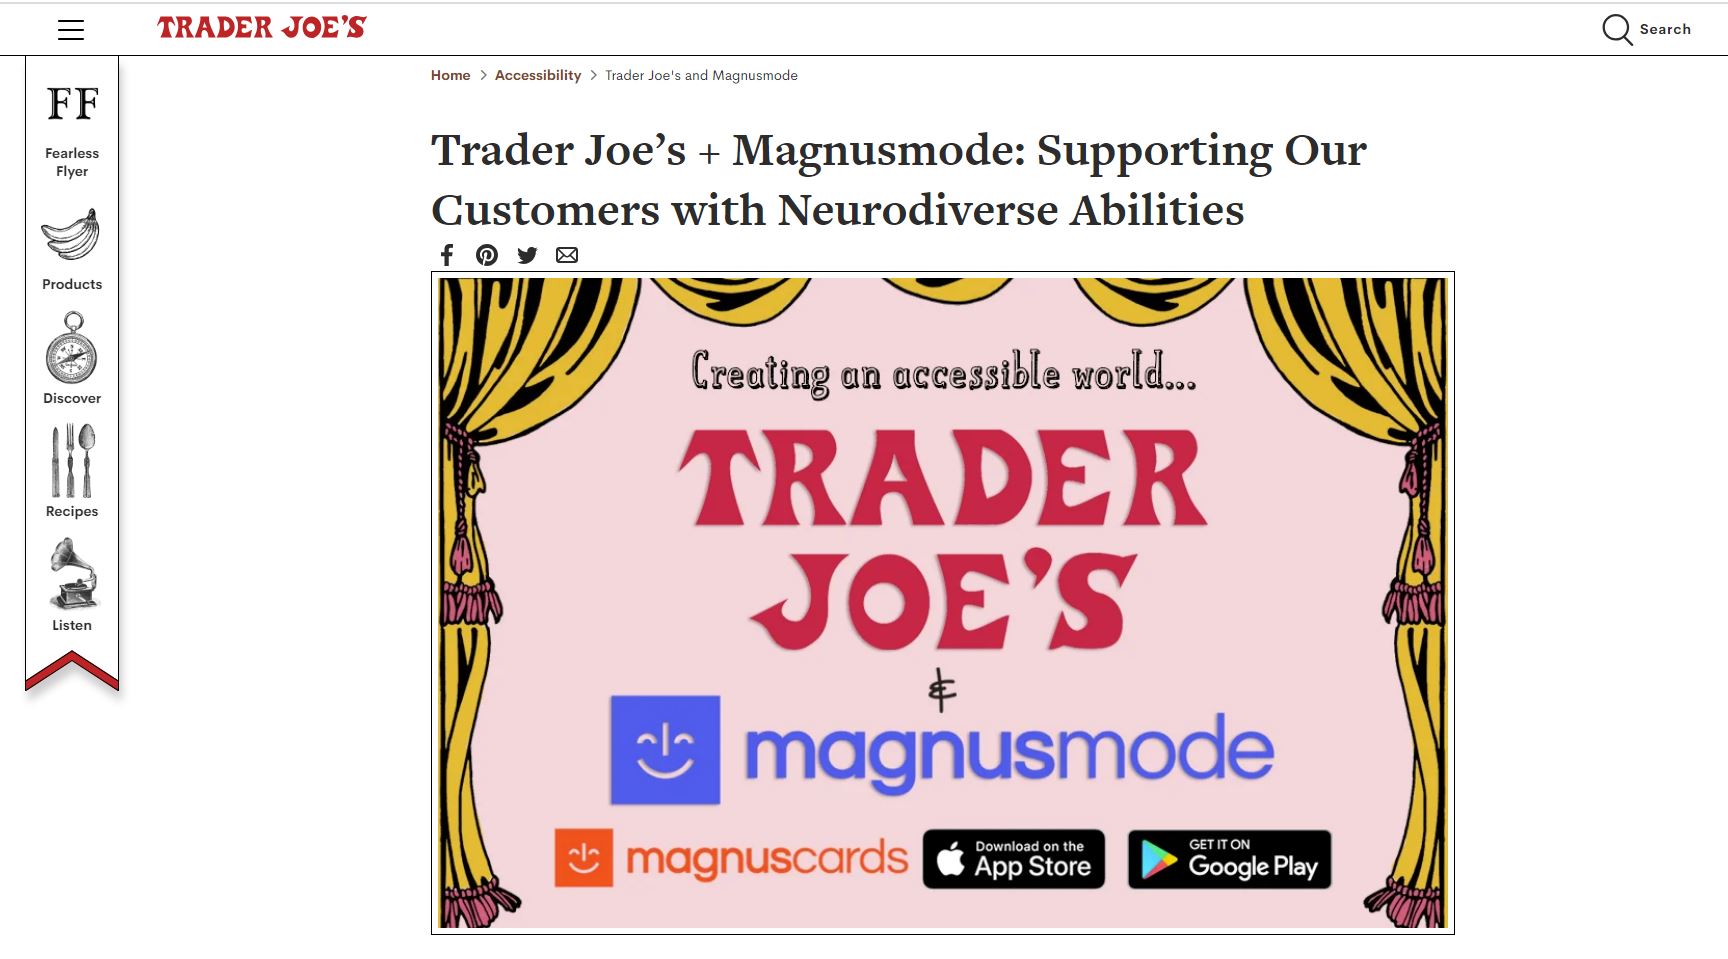 Trader Joe's poster featuring the MagnusCards app